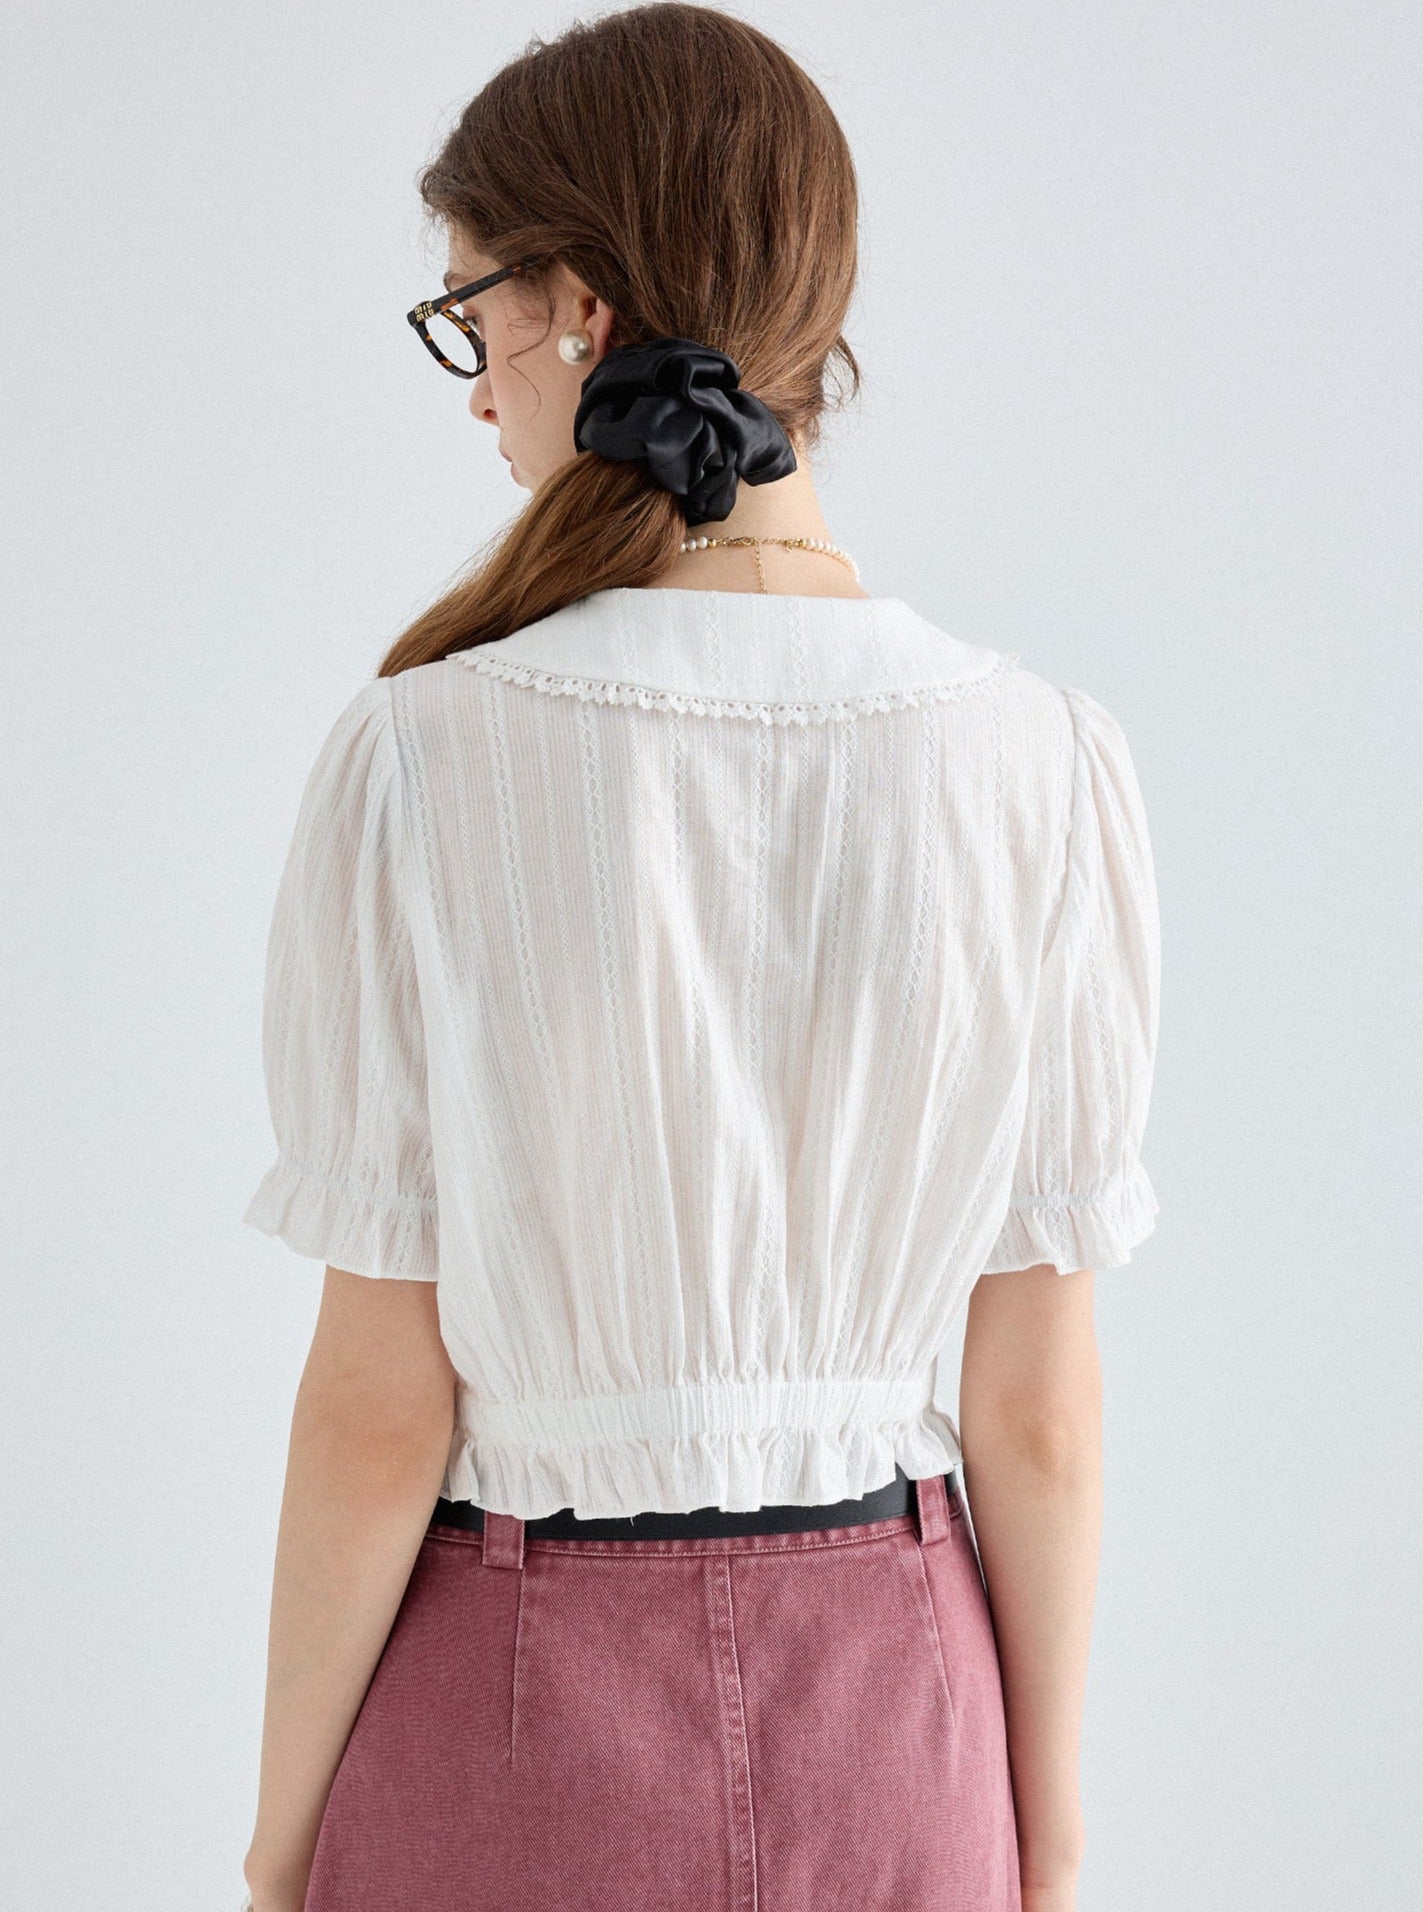 French Lace Collar Top